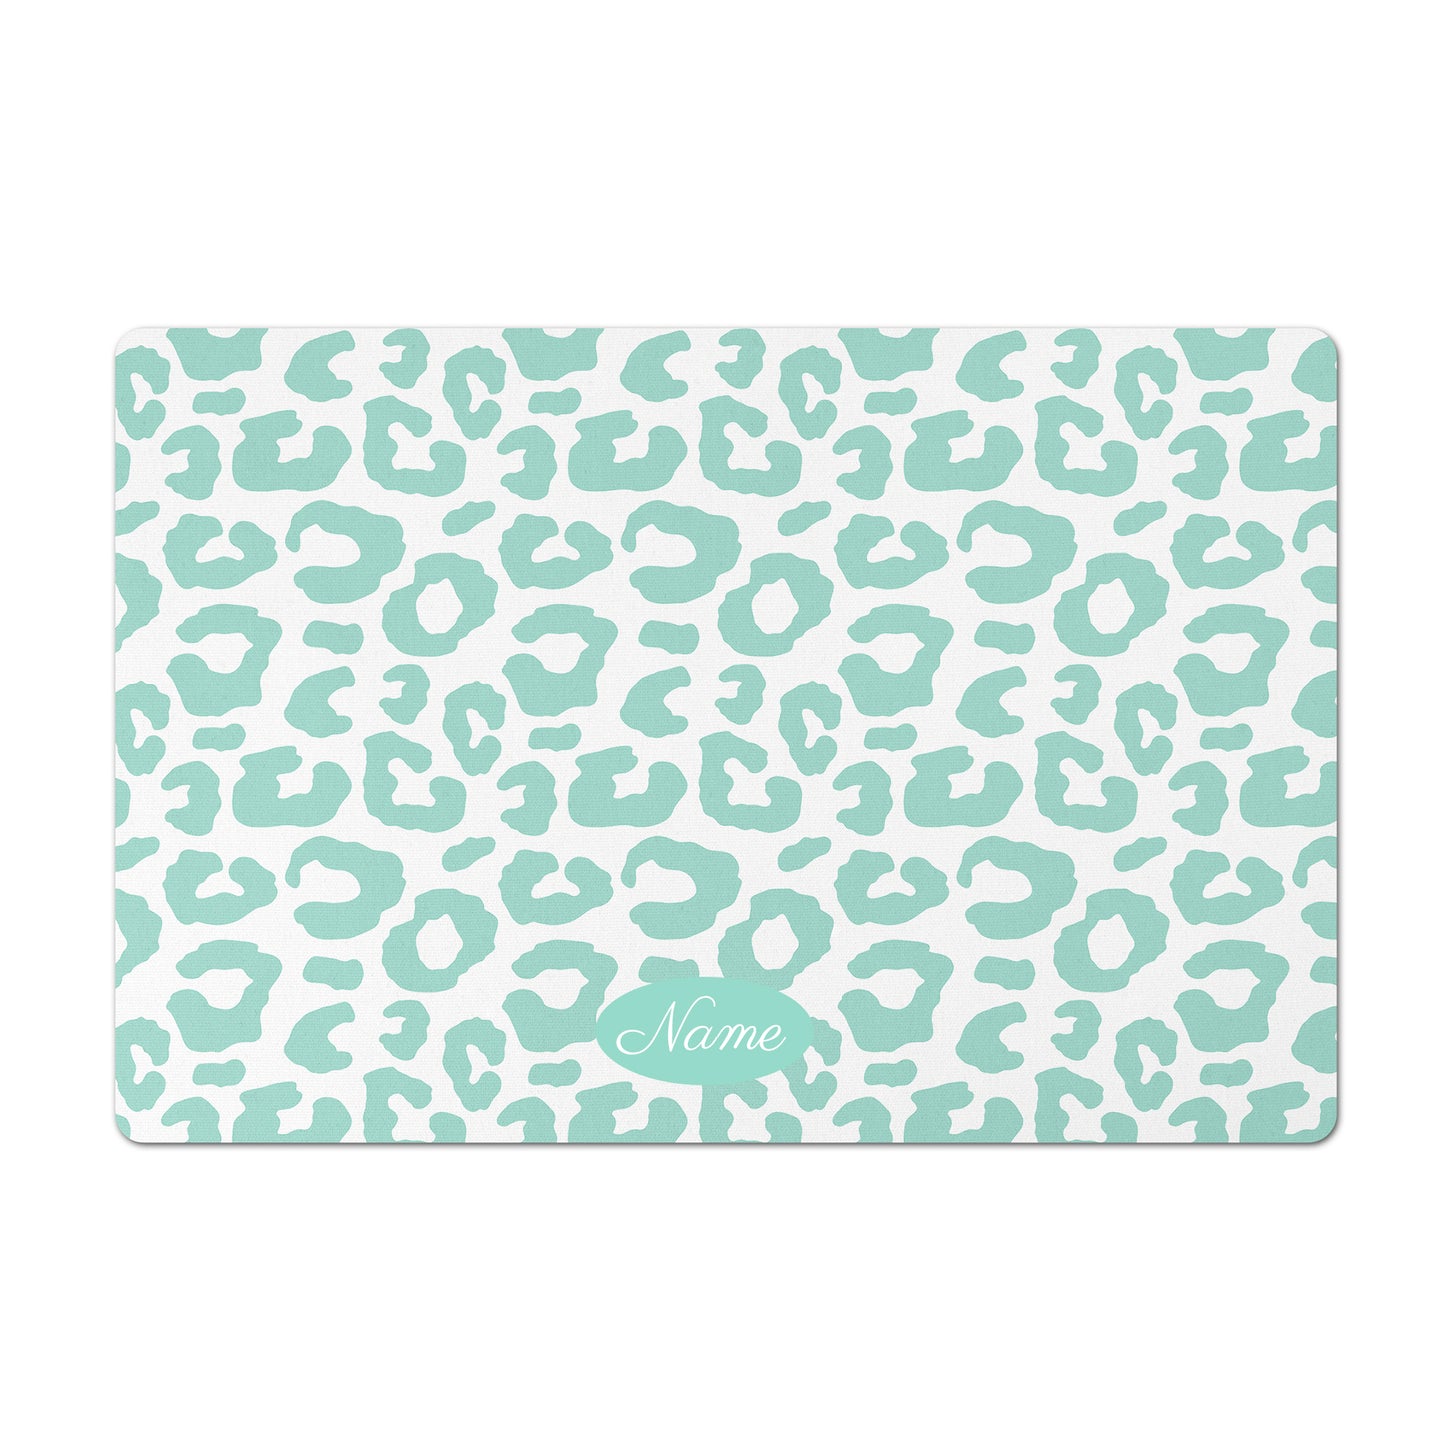 Personalized Leopard Pet Bowl Mat, Peppermint and White